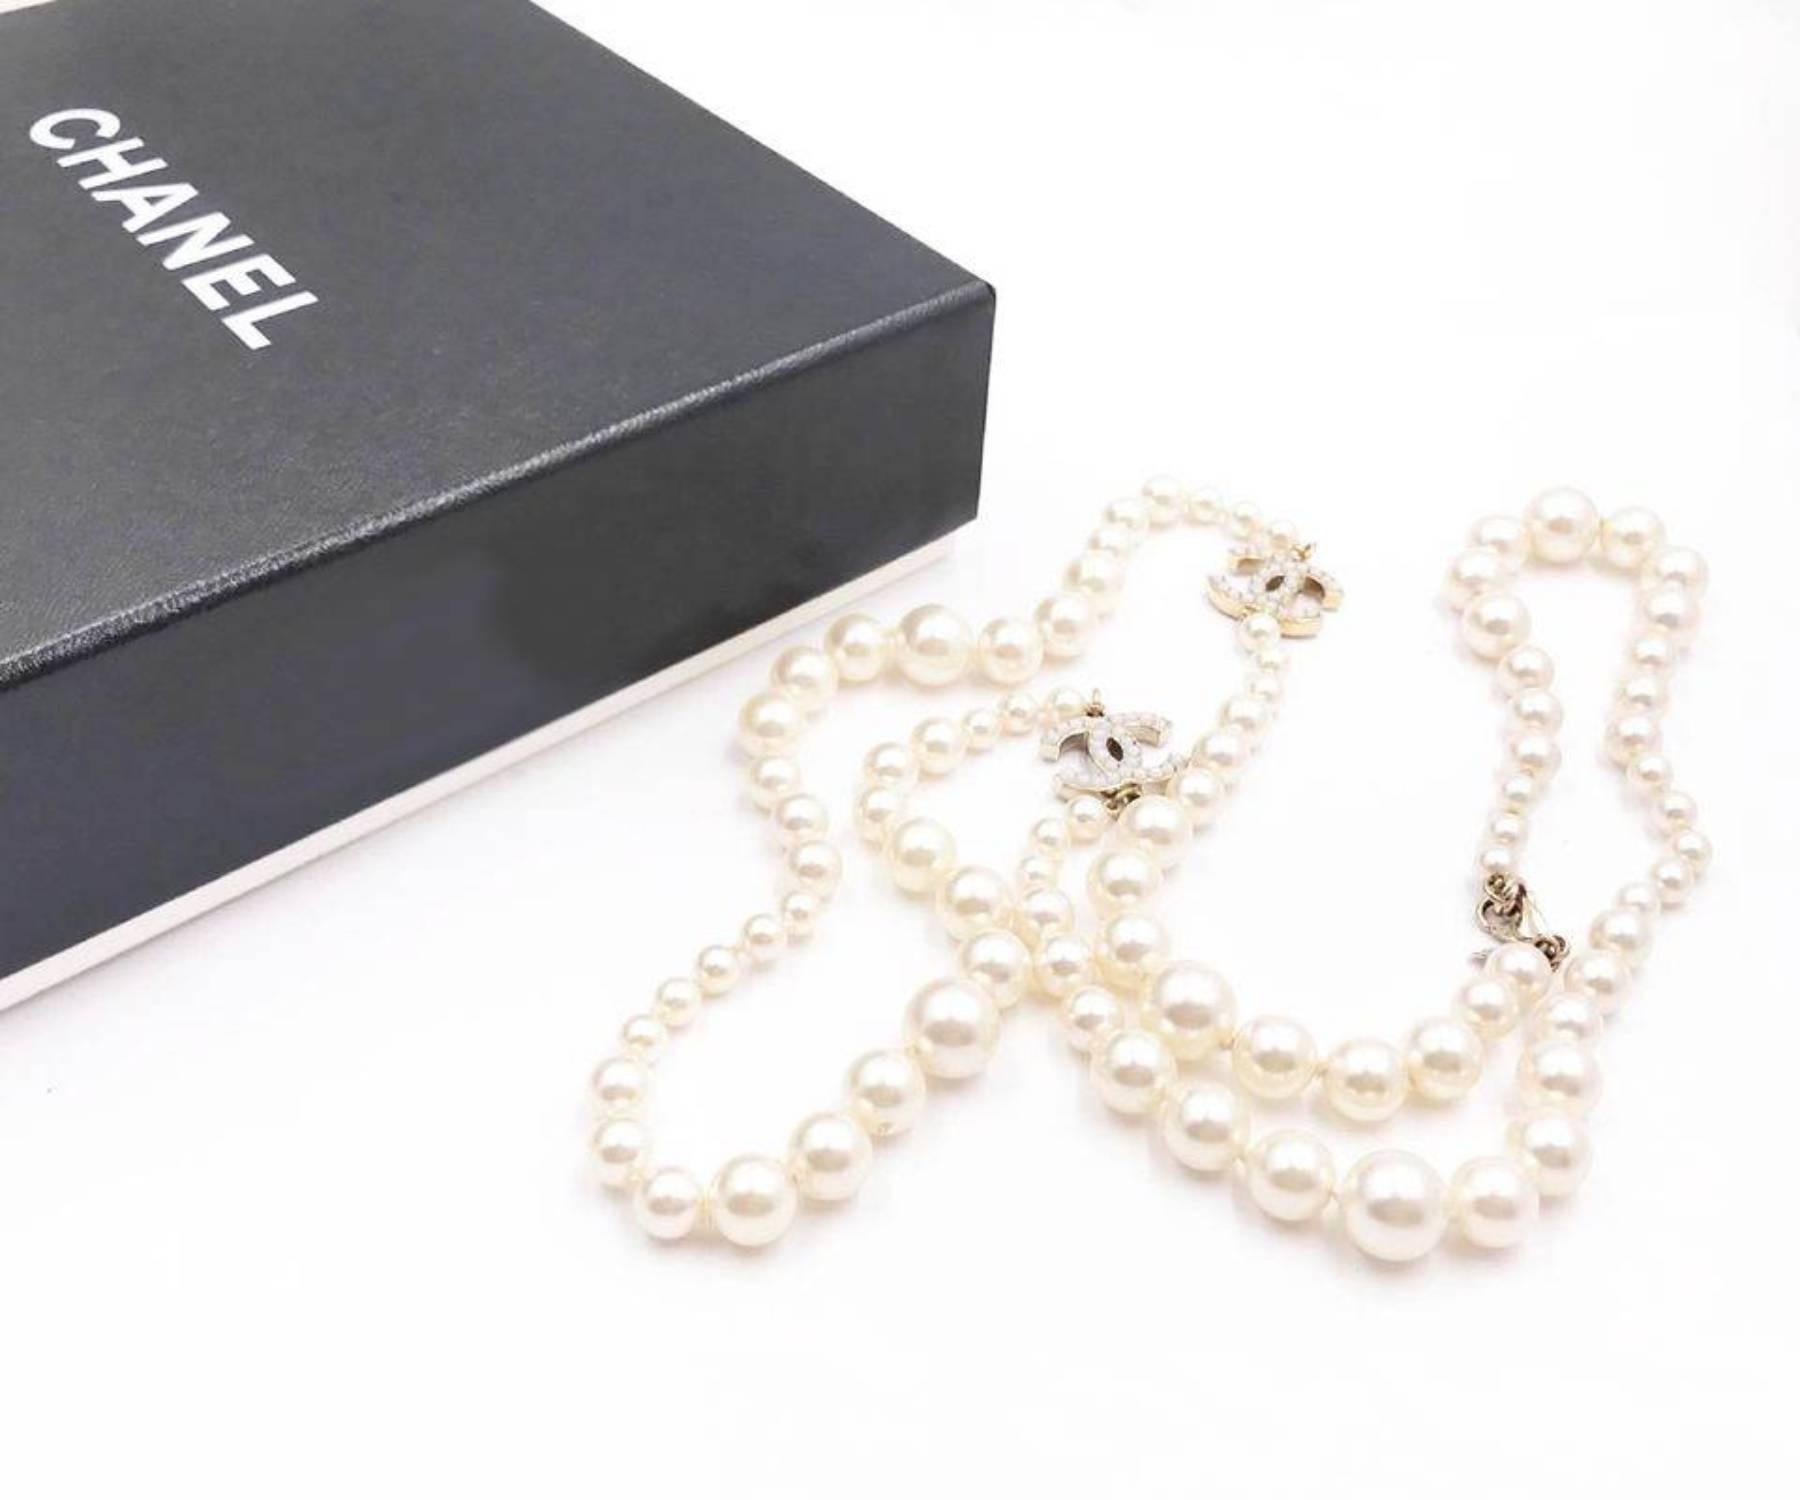 Artisan Chanel Classic 2 Gold CC White Bead Pearl Necklace